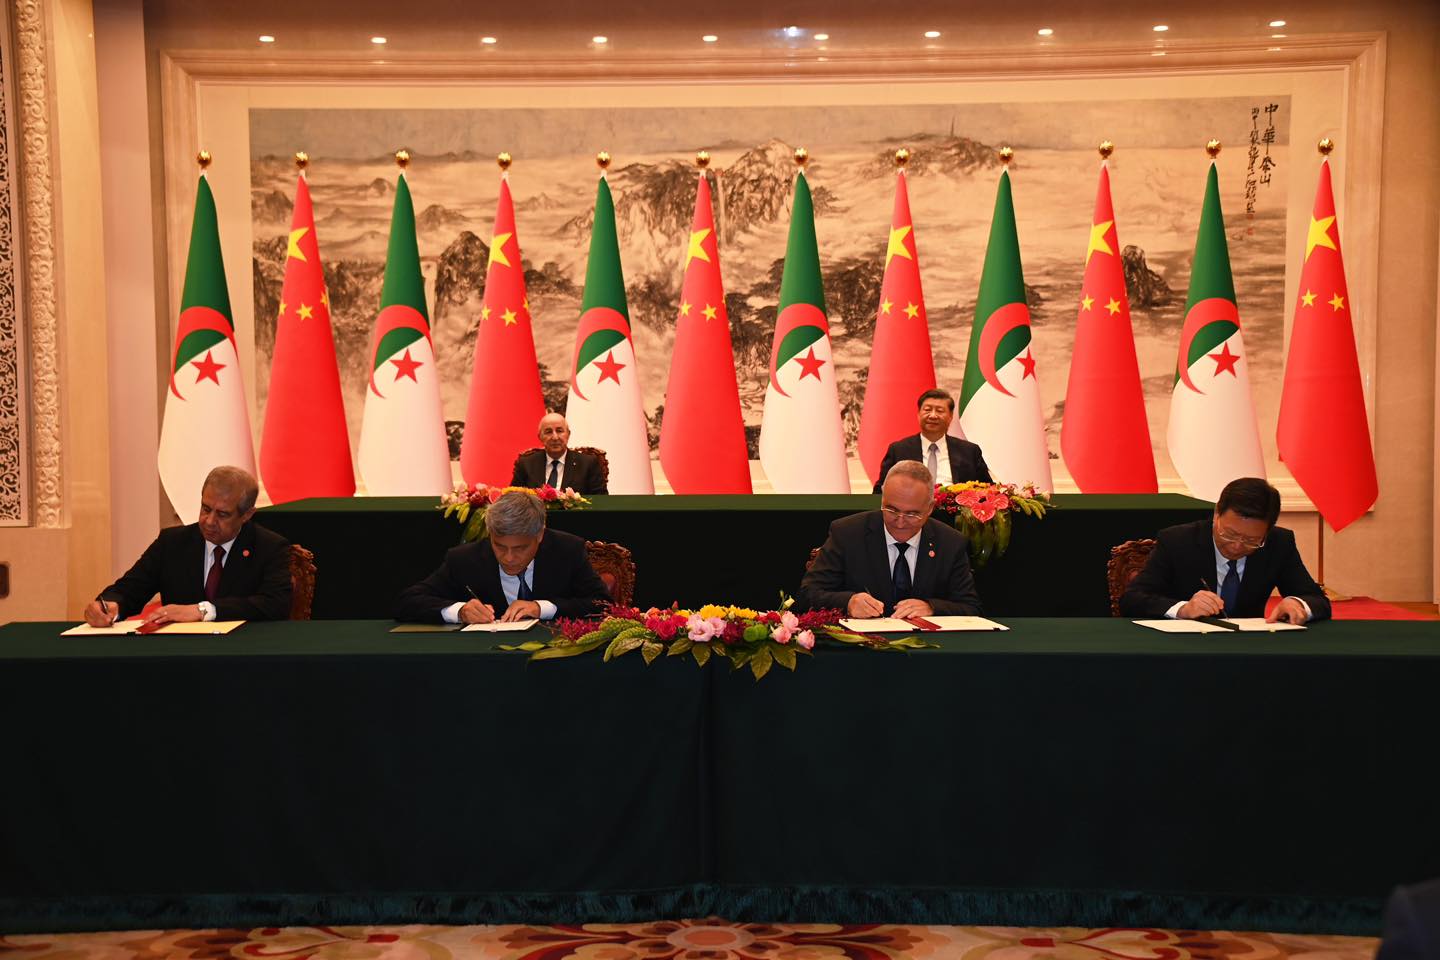 The Chinese giant is in a major partnership with Algeria in strategic projects - the Algerian Dialogue